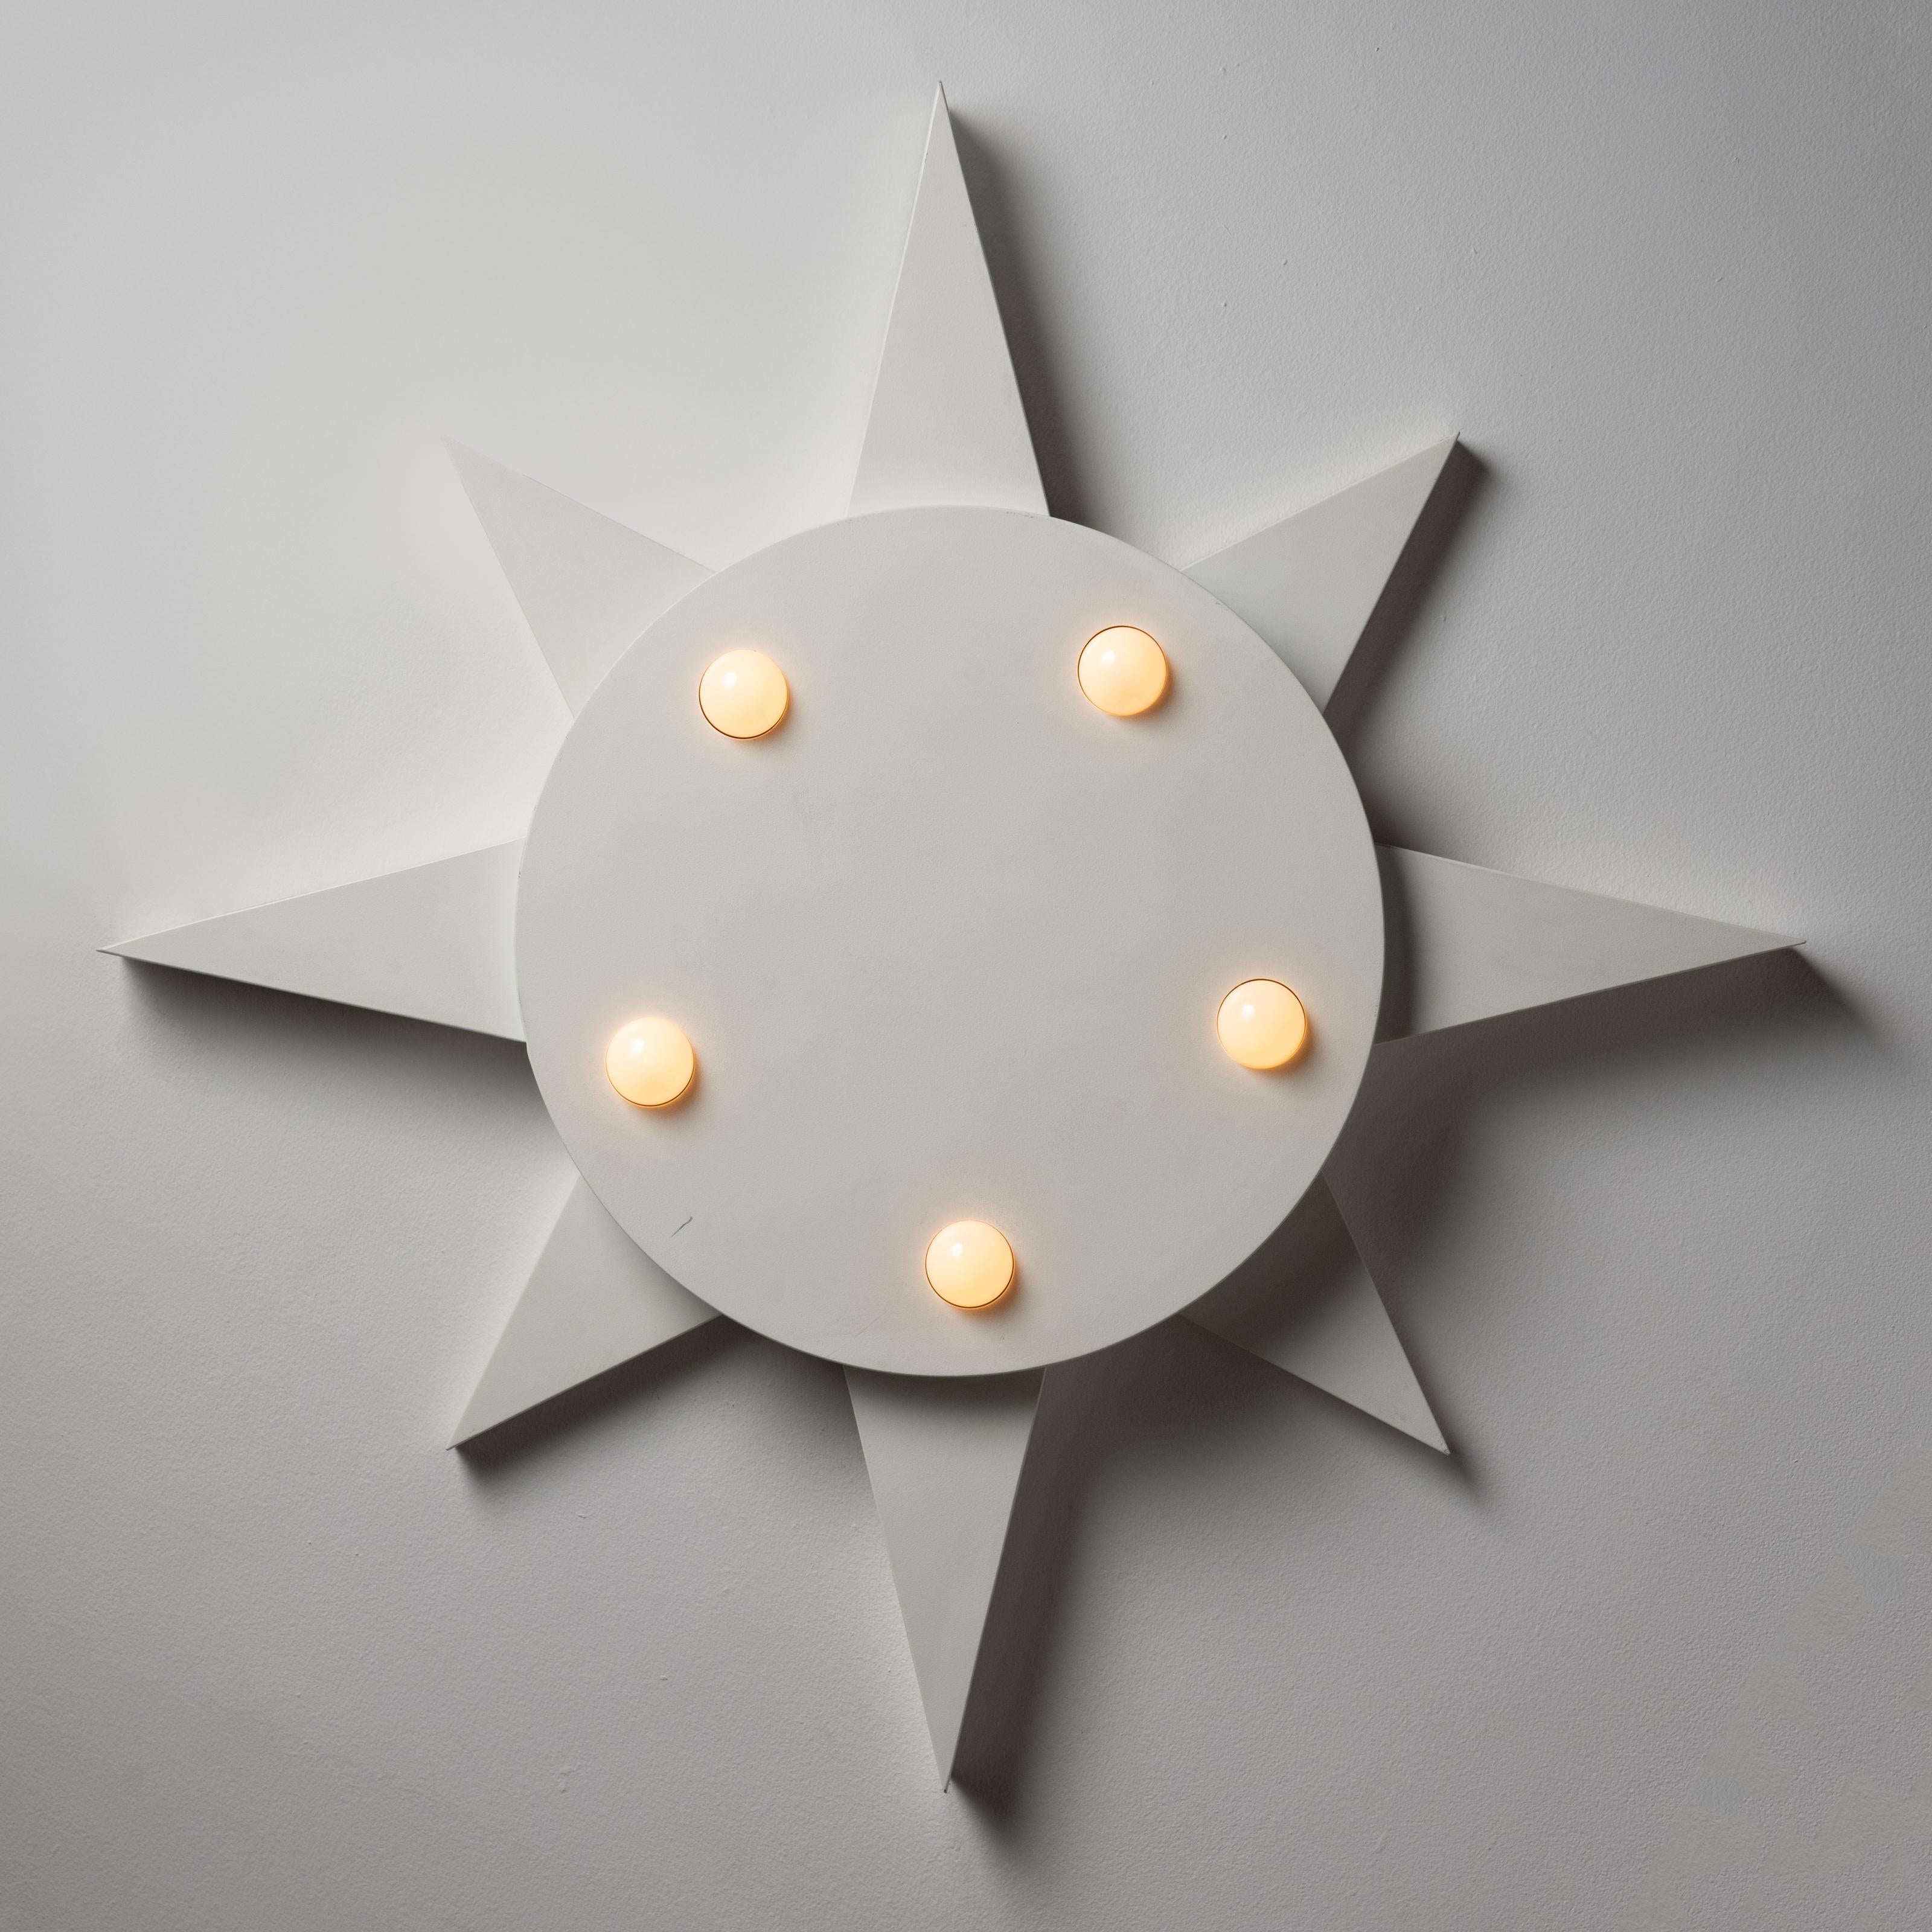 Rare Italian star lights. Designed and manufactured in Italy, circa 1970s. These star lamps are composed of metal with a matte white lacquer finish and are designed to be installed either as ceiling lamps or wall sconces. A unique playful and